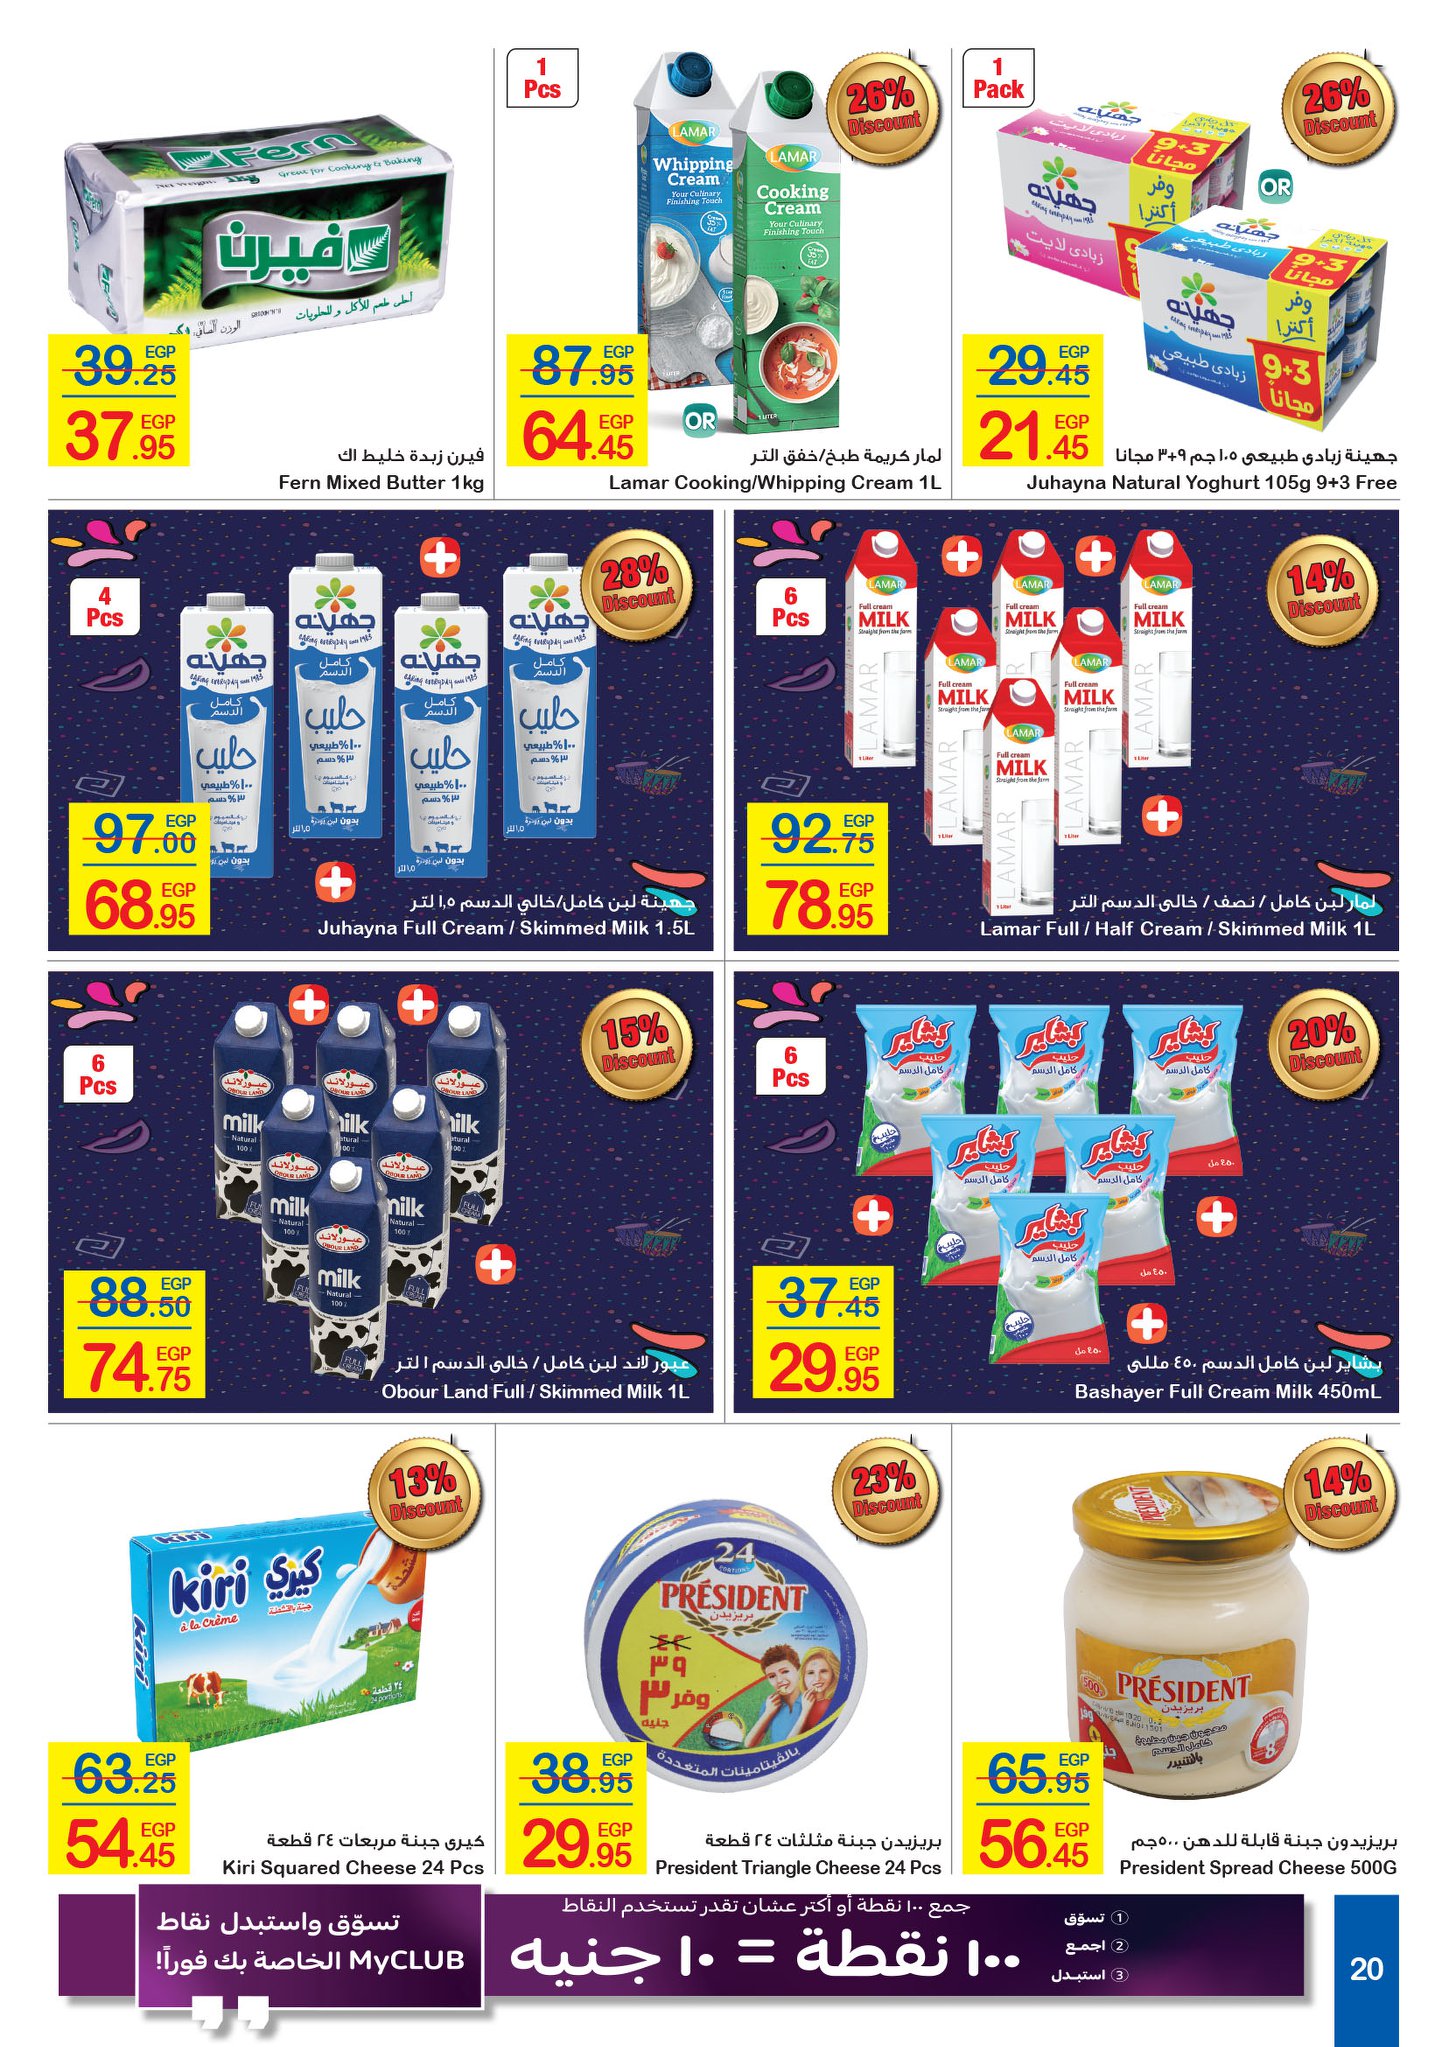 Carrefour Flyer from 16/7 till 27/7 | Carrefour Egypt 20